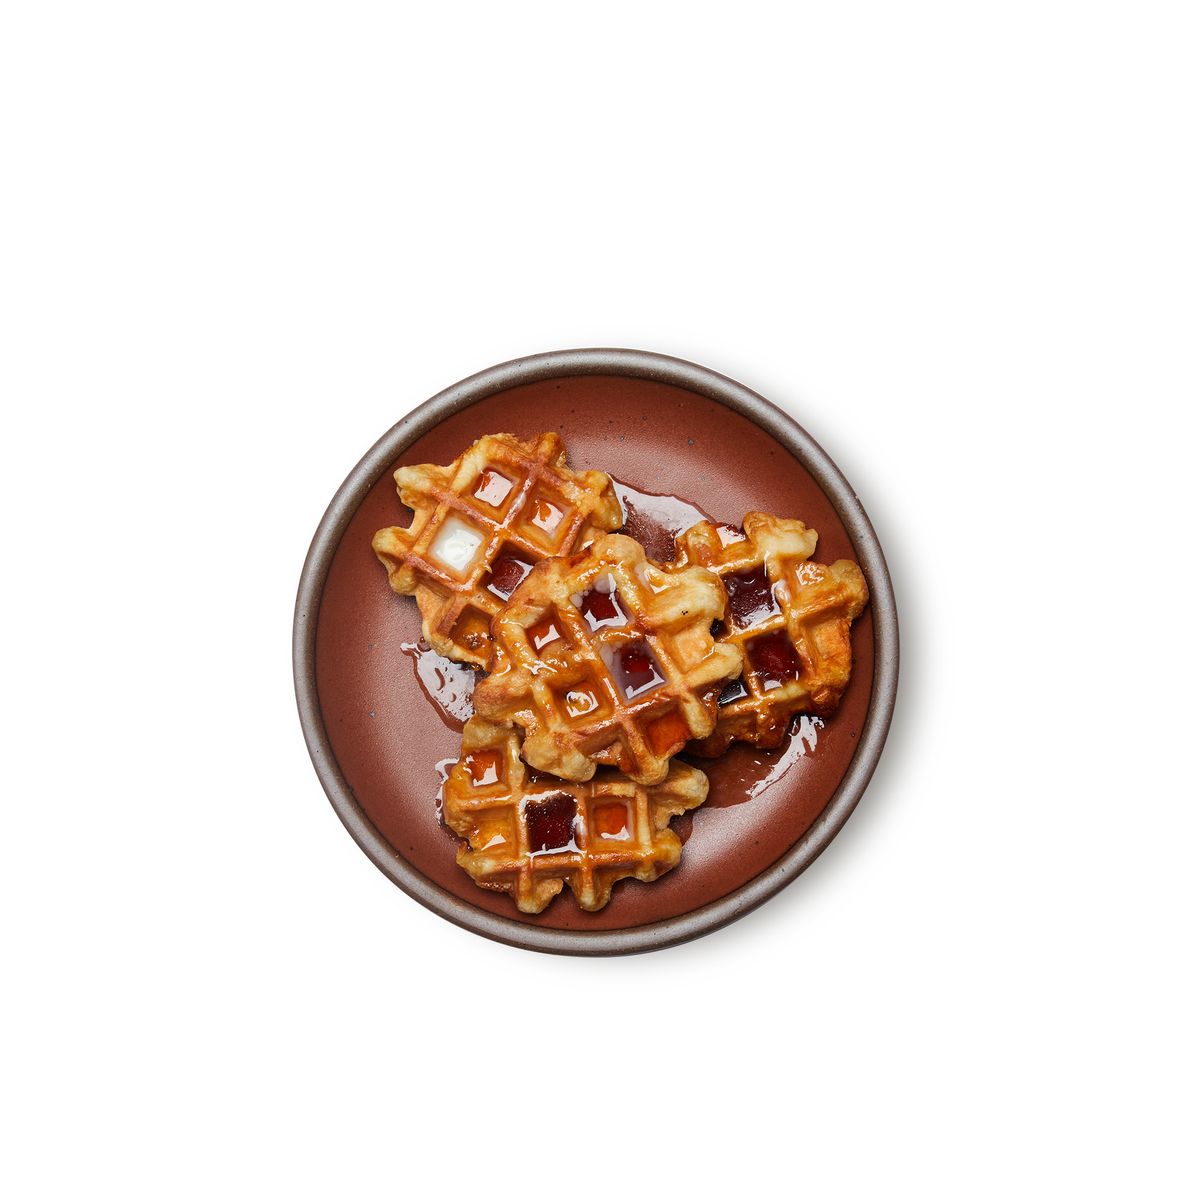 Waffles and syrup on a medium sized ceramic plate in a cool burnt terracotta color featuring iron speckles and an unglazed rim.